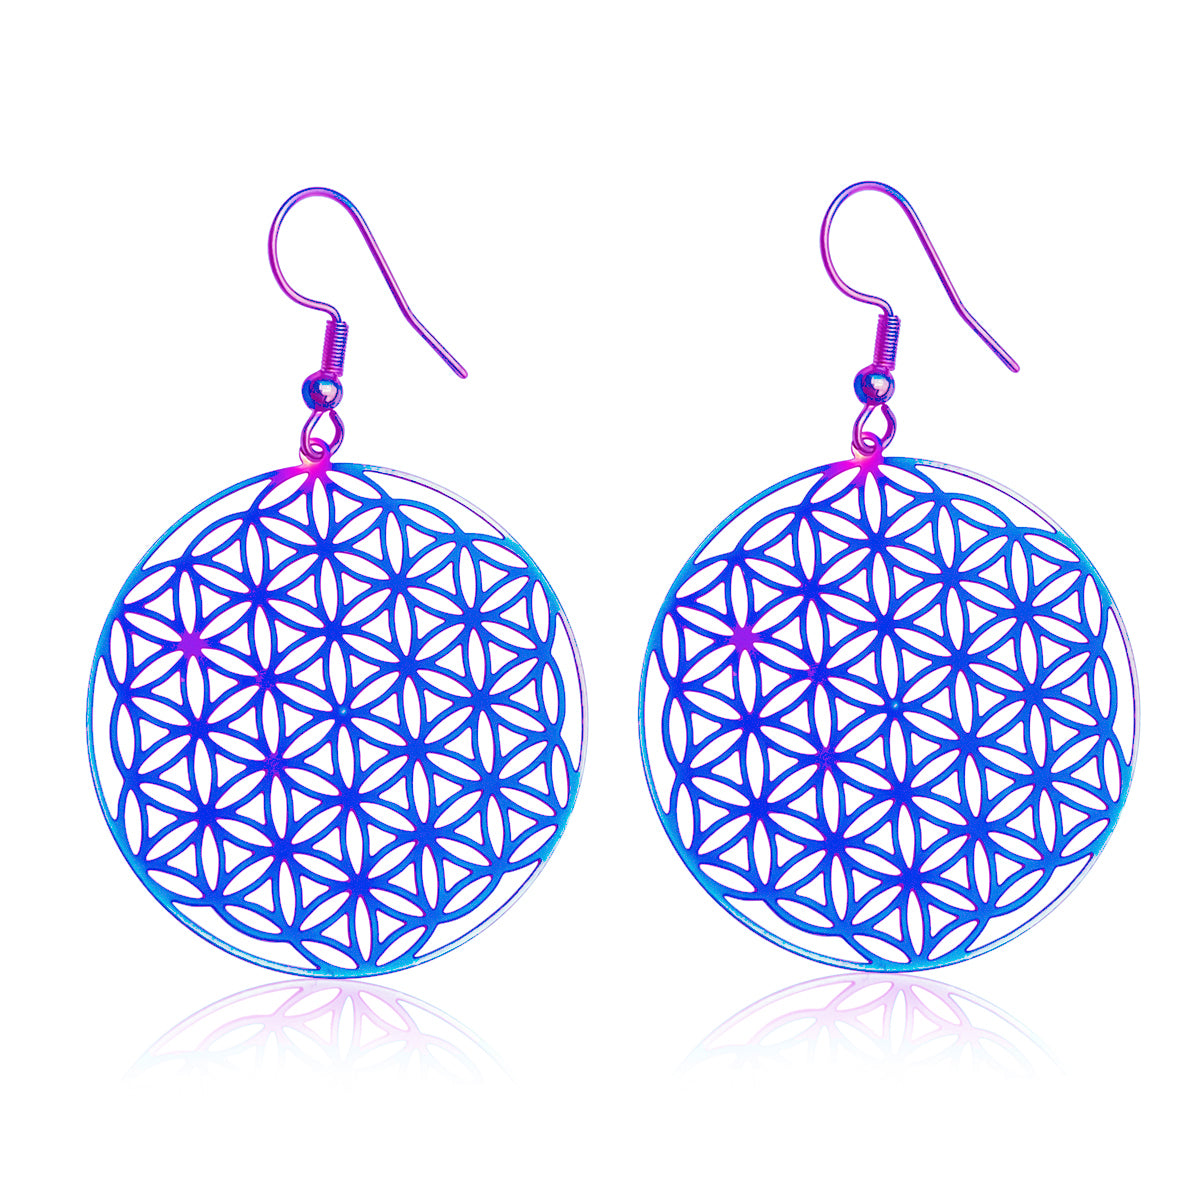 Wear the "Rainbow Flower of Life Earrings" to infuse your look with the vibrant colors of the rainbow and let them be a symbol of your unique, bohemian journey